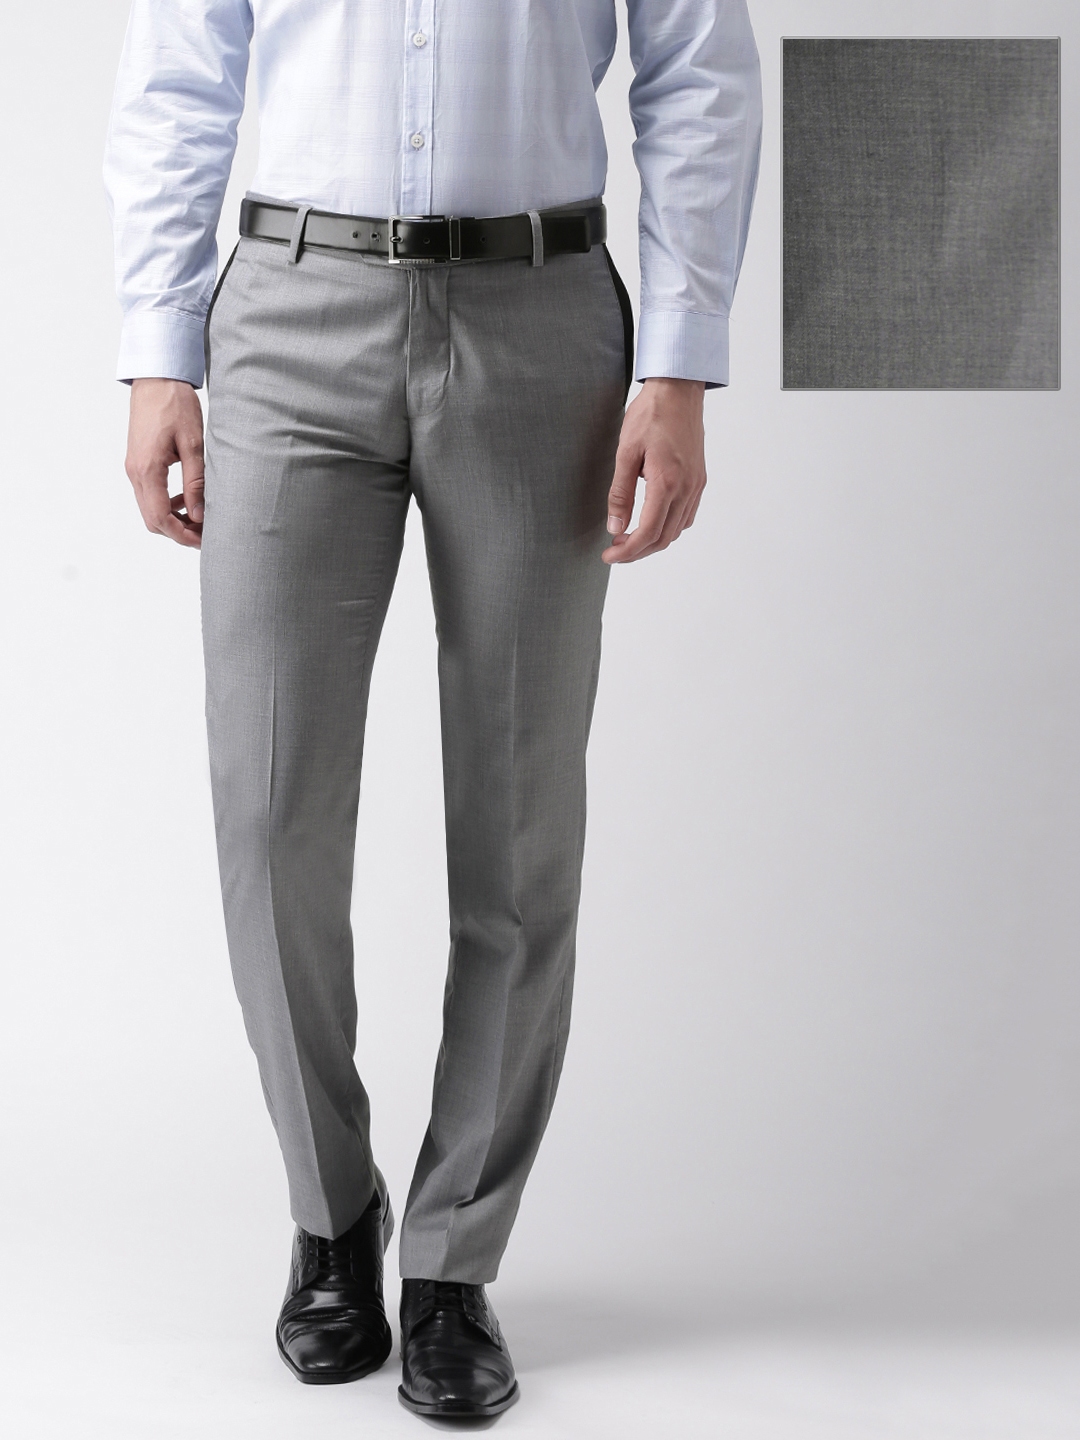 Buy INVICTUS Grey Slim Fit Formal Trousers - Trousers for Men 1404250 ...